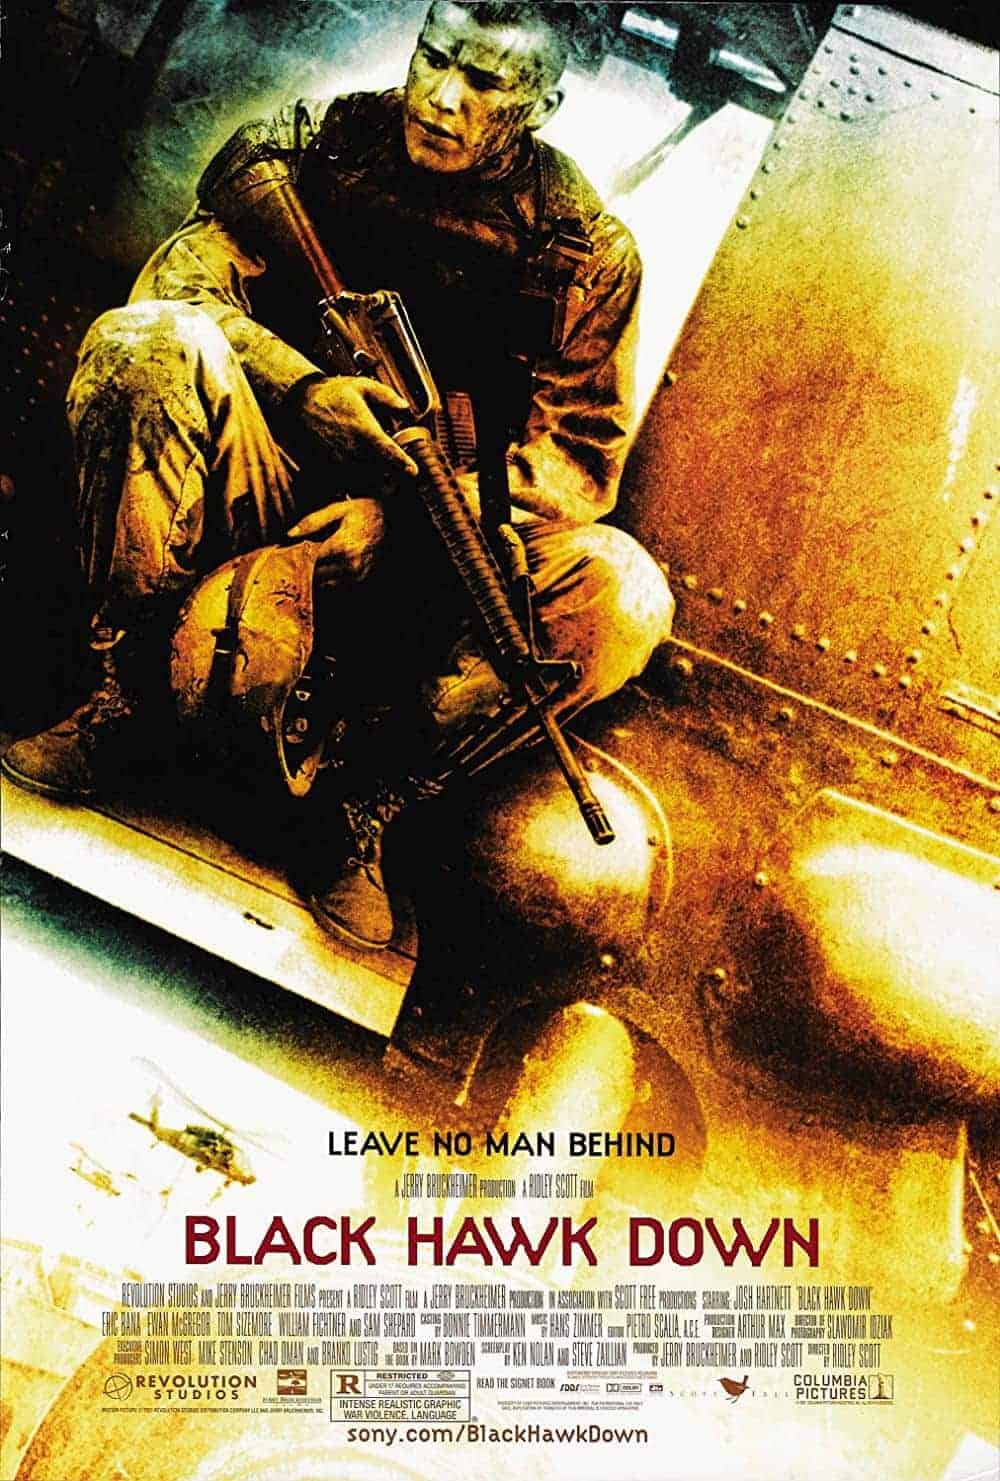 Black Hawk Down (2001) Best Special Forces Movies You Can't Miss